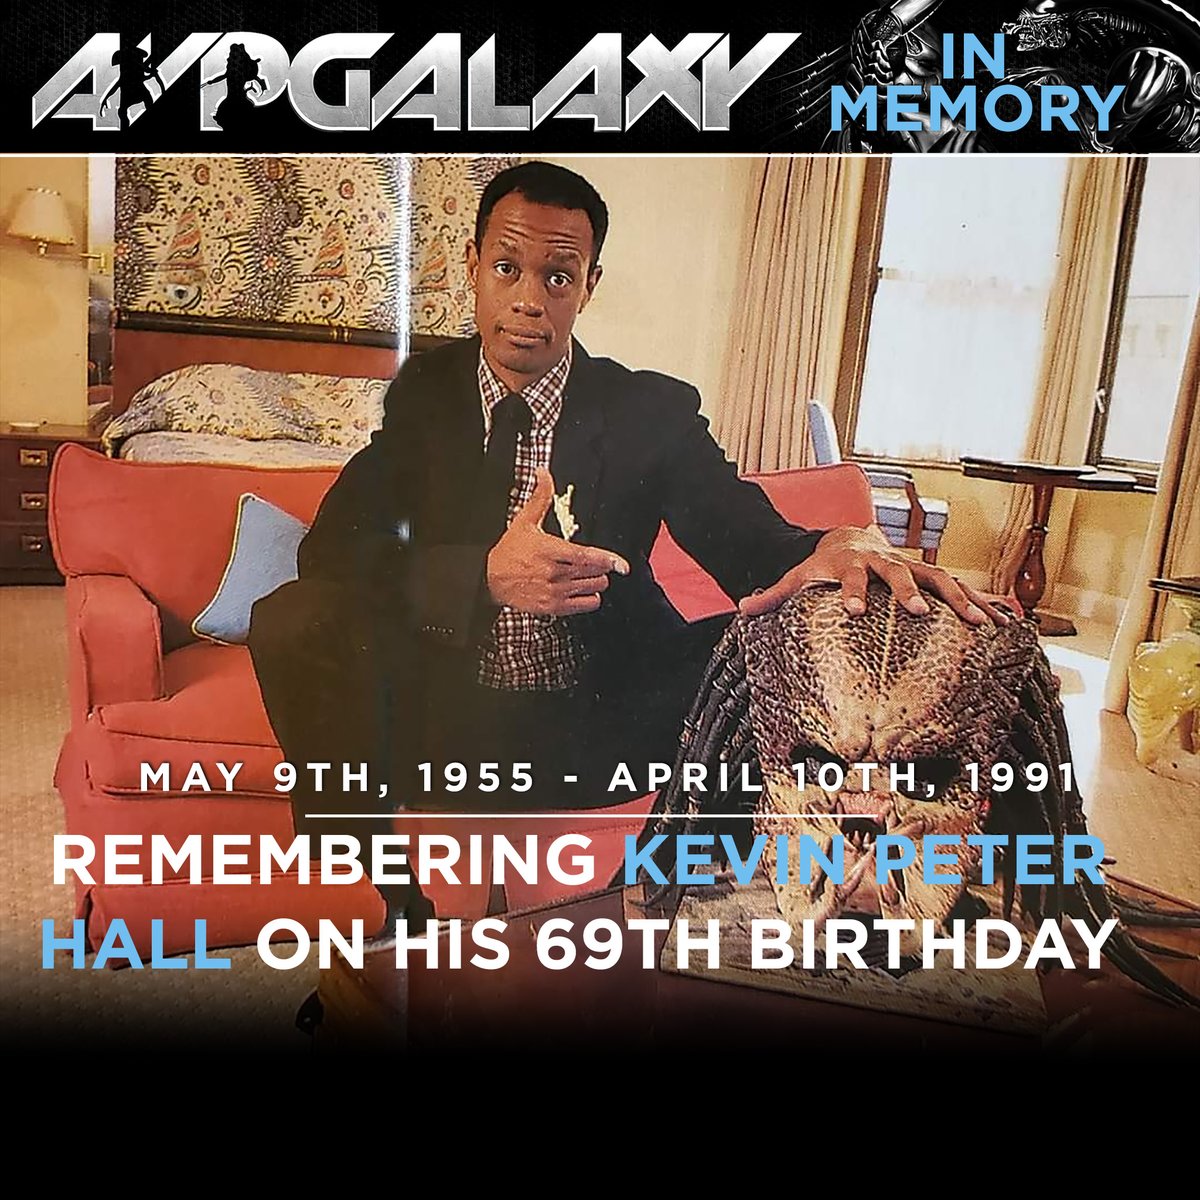 Please join everyone at Alien vs. Predator Galaxy in remembering the amazing Kevin Peter Hall on what would have been his 69th birthday. #KevinPeterHall #HappyBirthday #InMemory #Predator #Predator2 #Yautja #CityHunter📷 #JungleHunter #Greyback